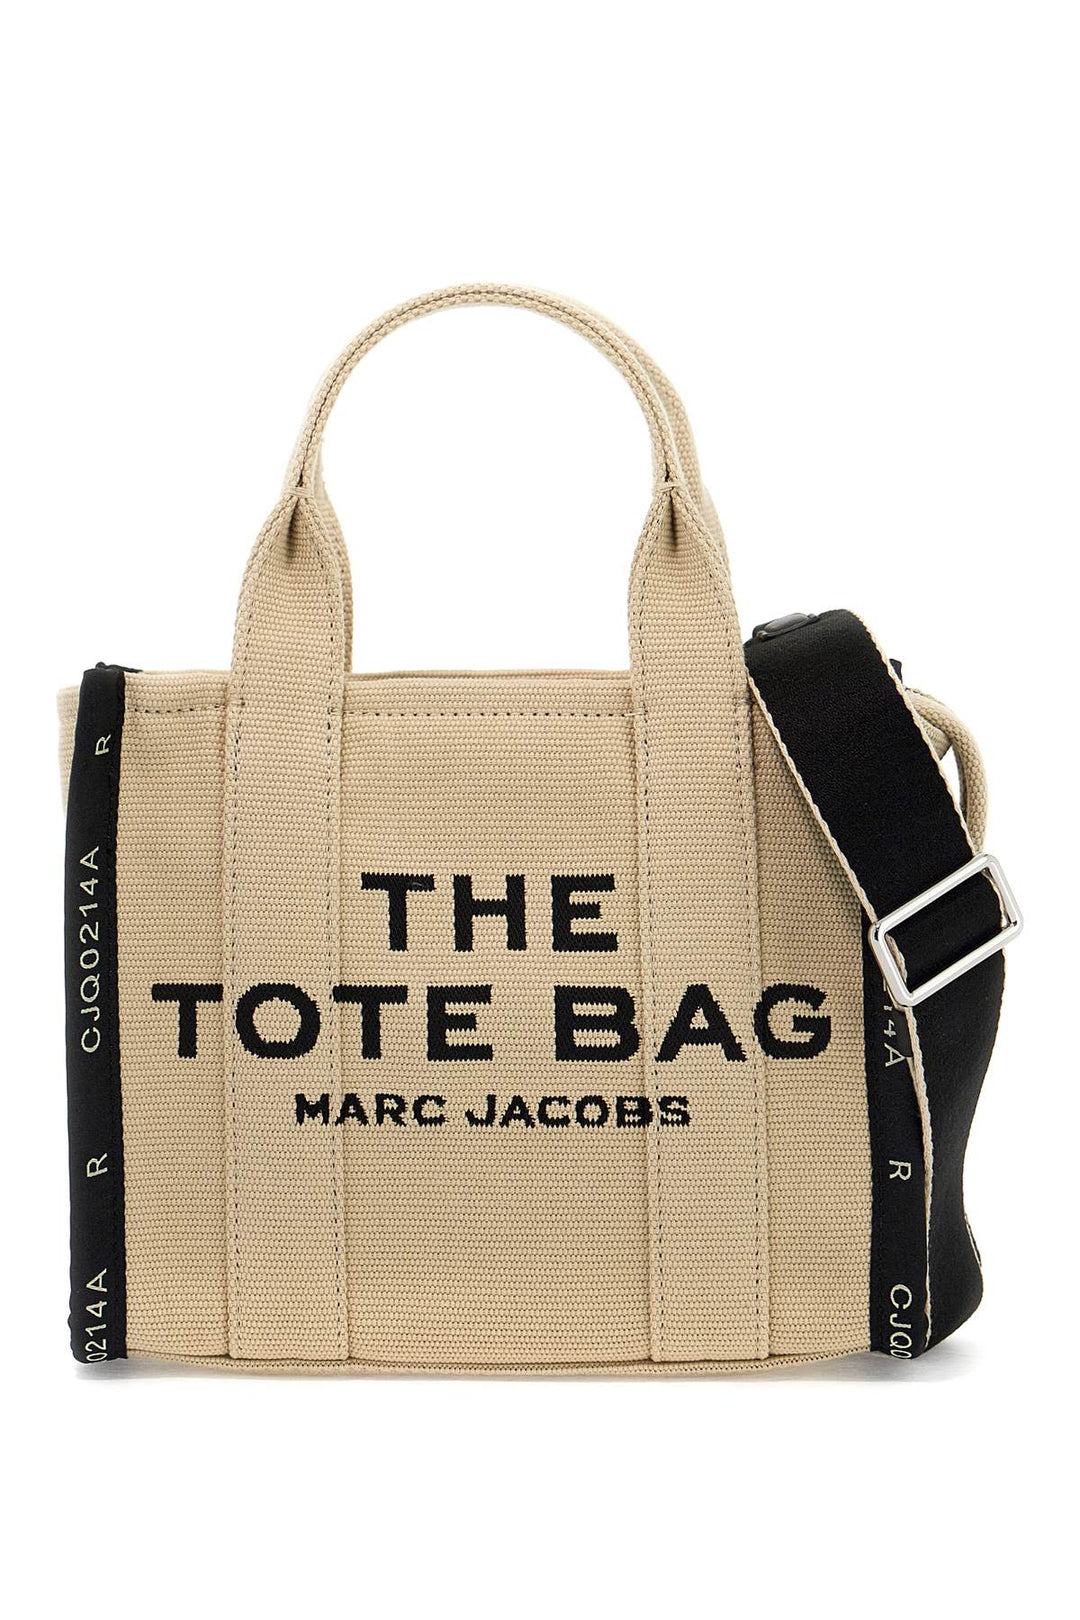 Marc Jacobs The Jacquard Small Tote Bag   Beige